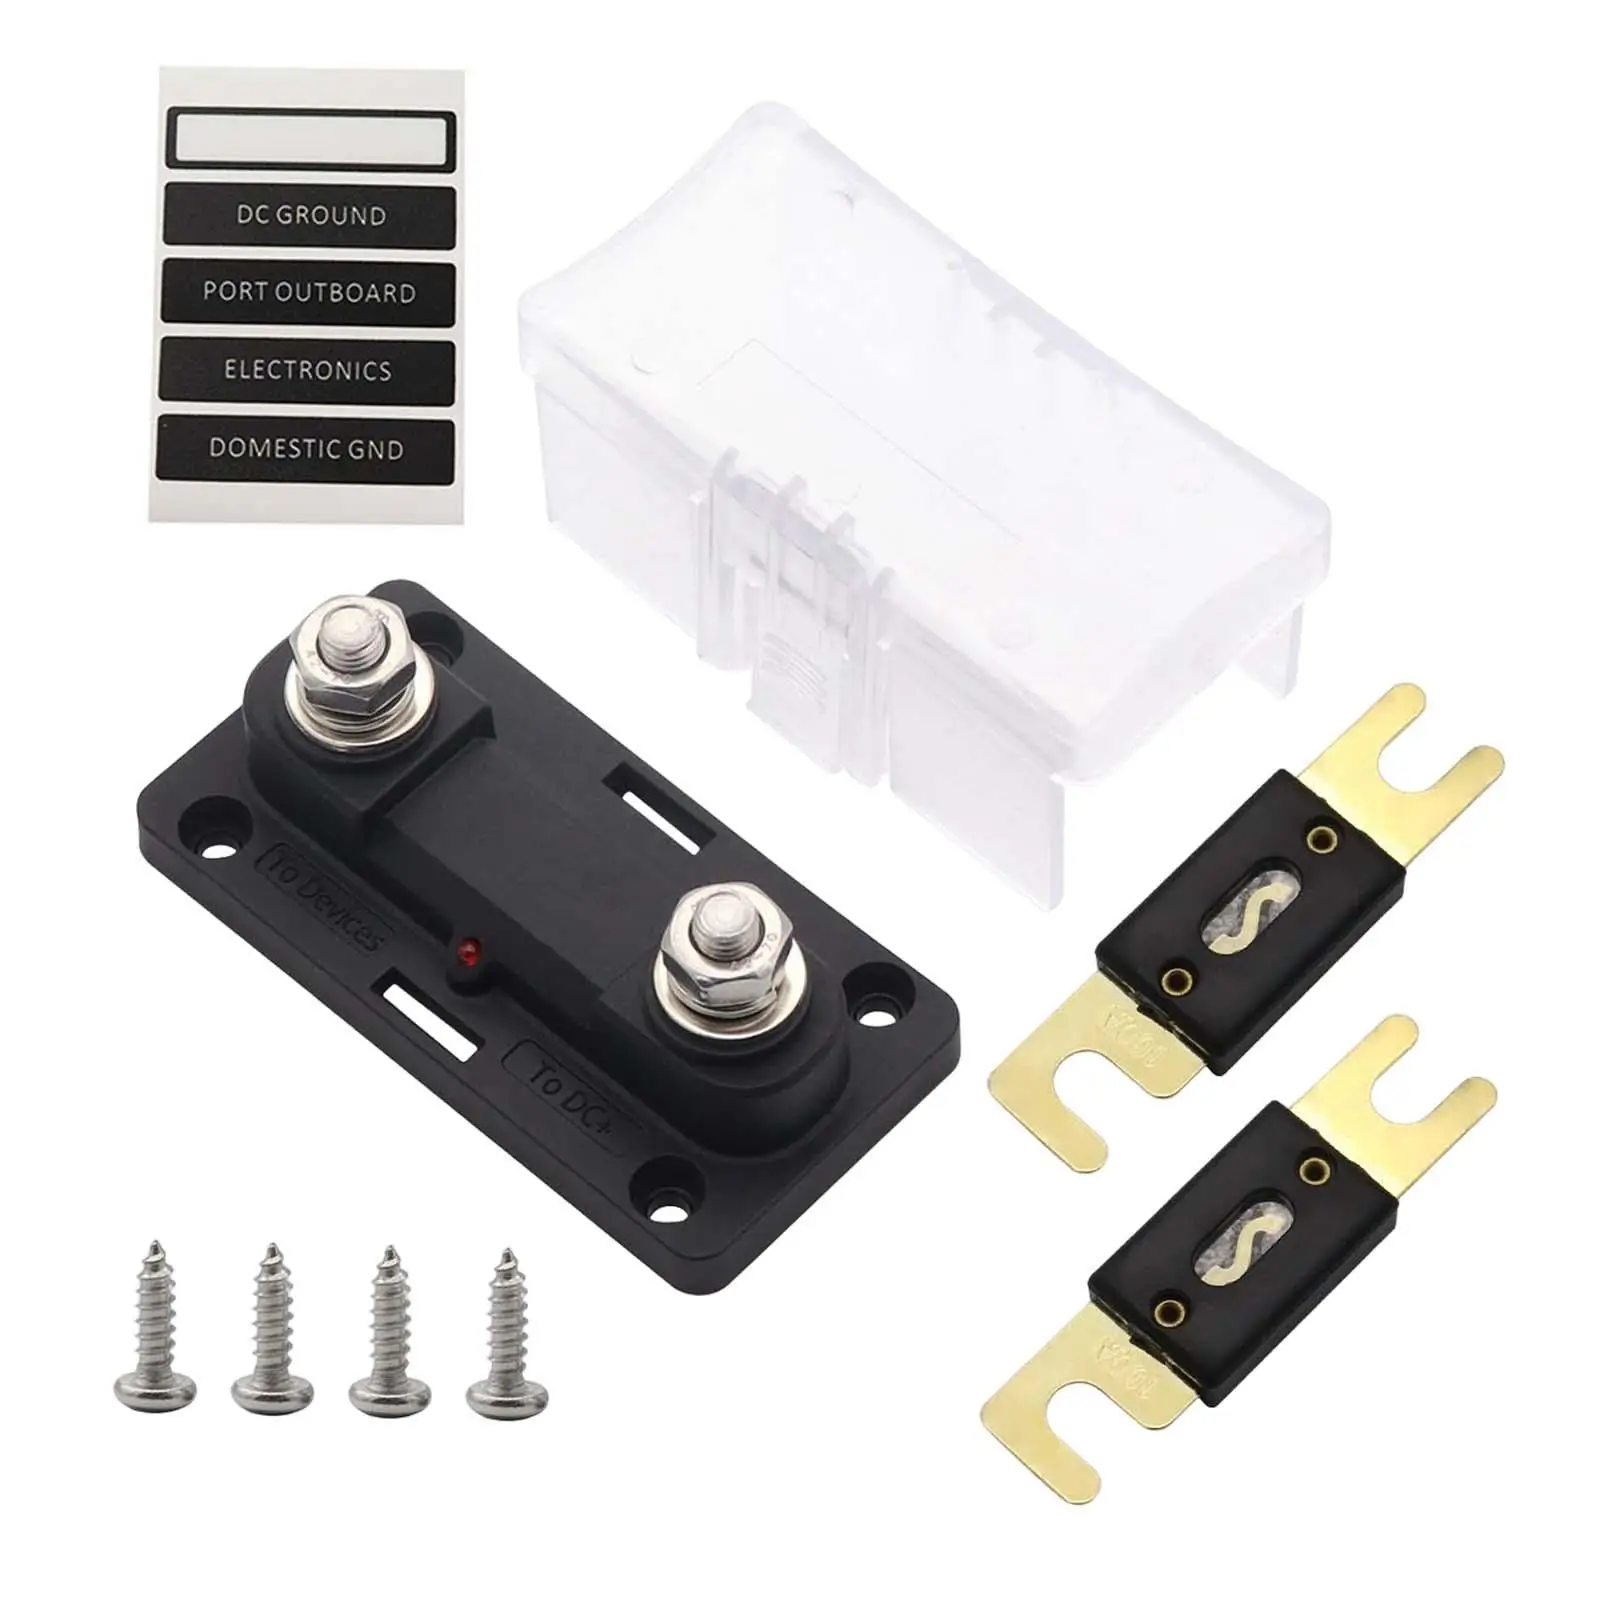 12V/24V Car Anl Fuse Block Holder with Insulating Cover M8 Replace Parts Fuse Box for Automotive Boat Vehicles Truck Car